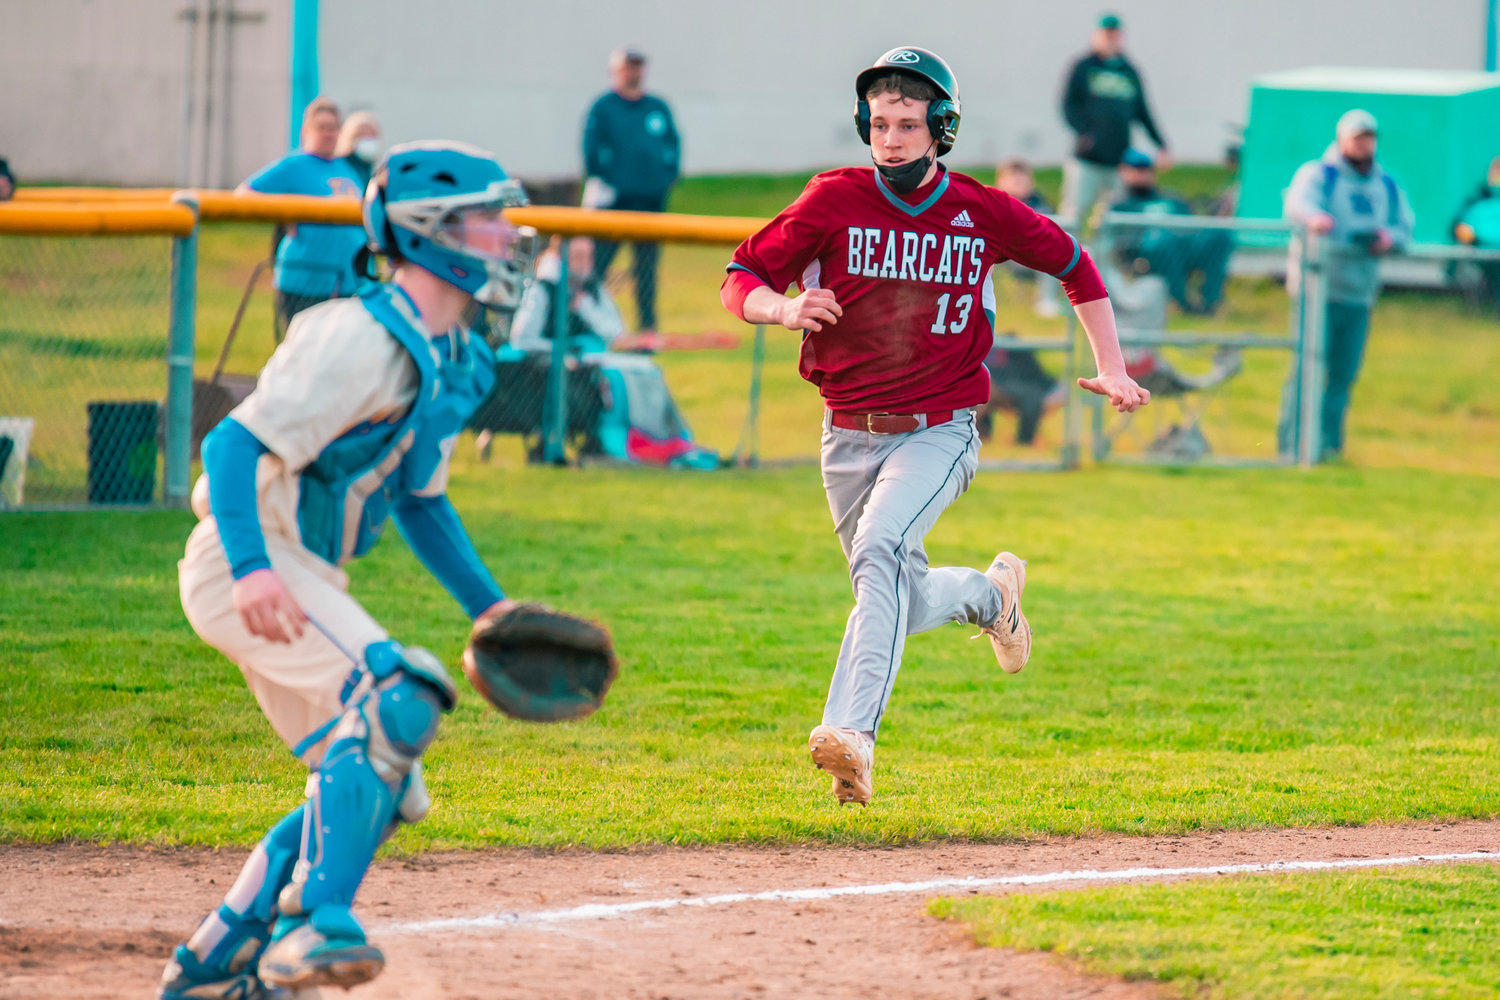 Bearcats’ Gavin Fugate (13) runs towards home plate while trying to score during a game against the Warriors in Rochester on Wednesday.